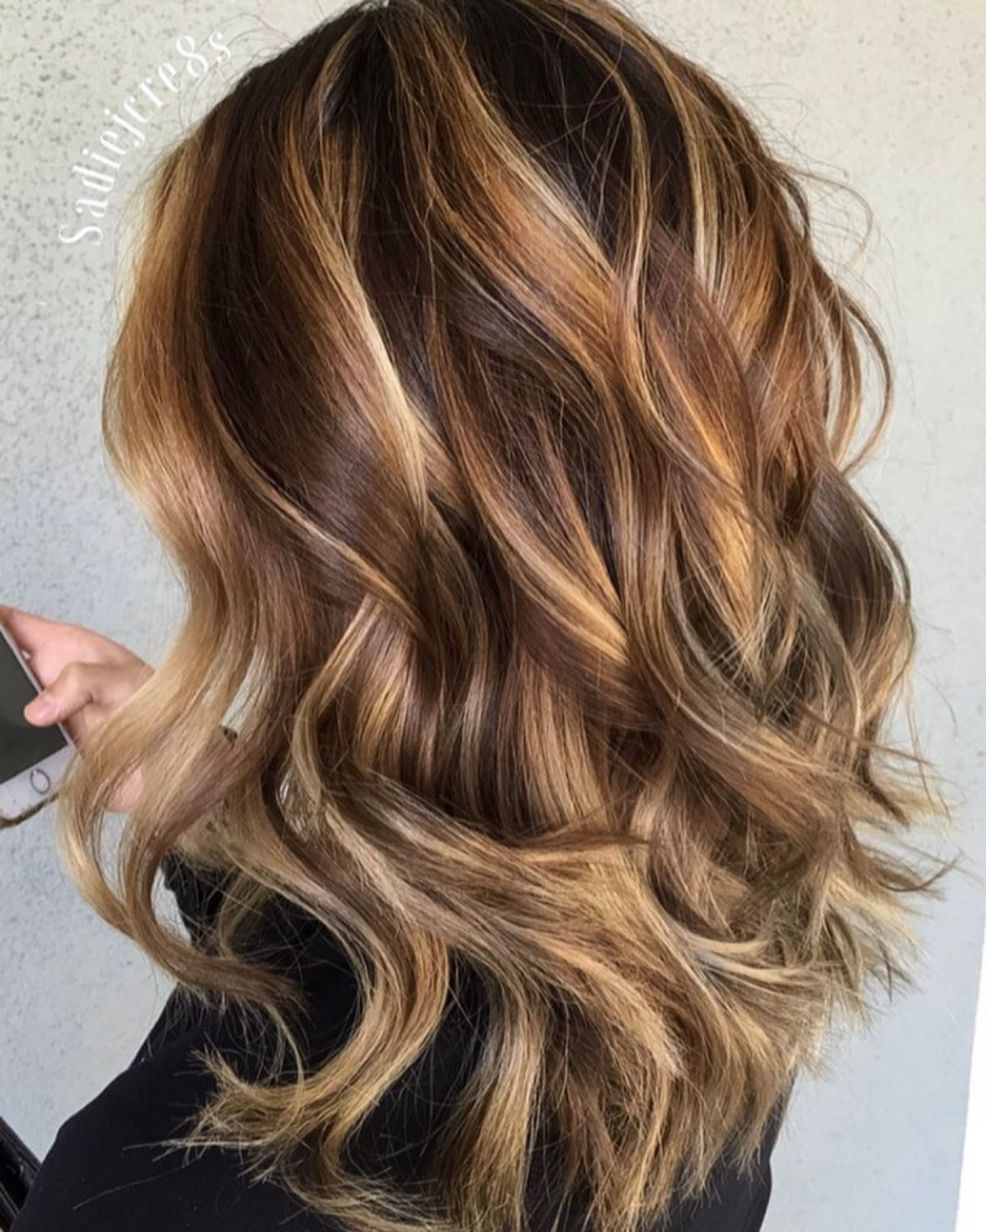 50 Ideas for Light Brown Hair with Highlights and Lowlights -   15 hair Fall style ideas